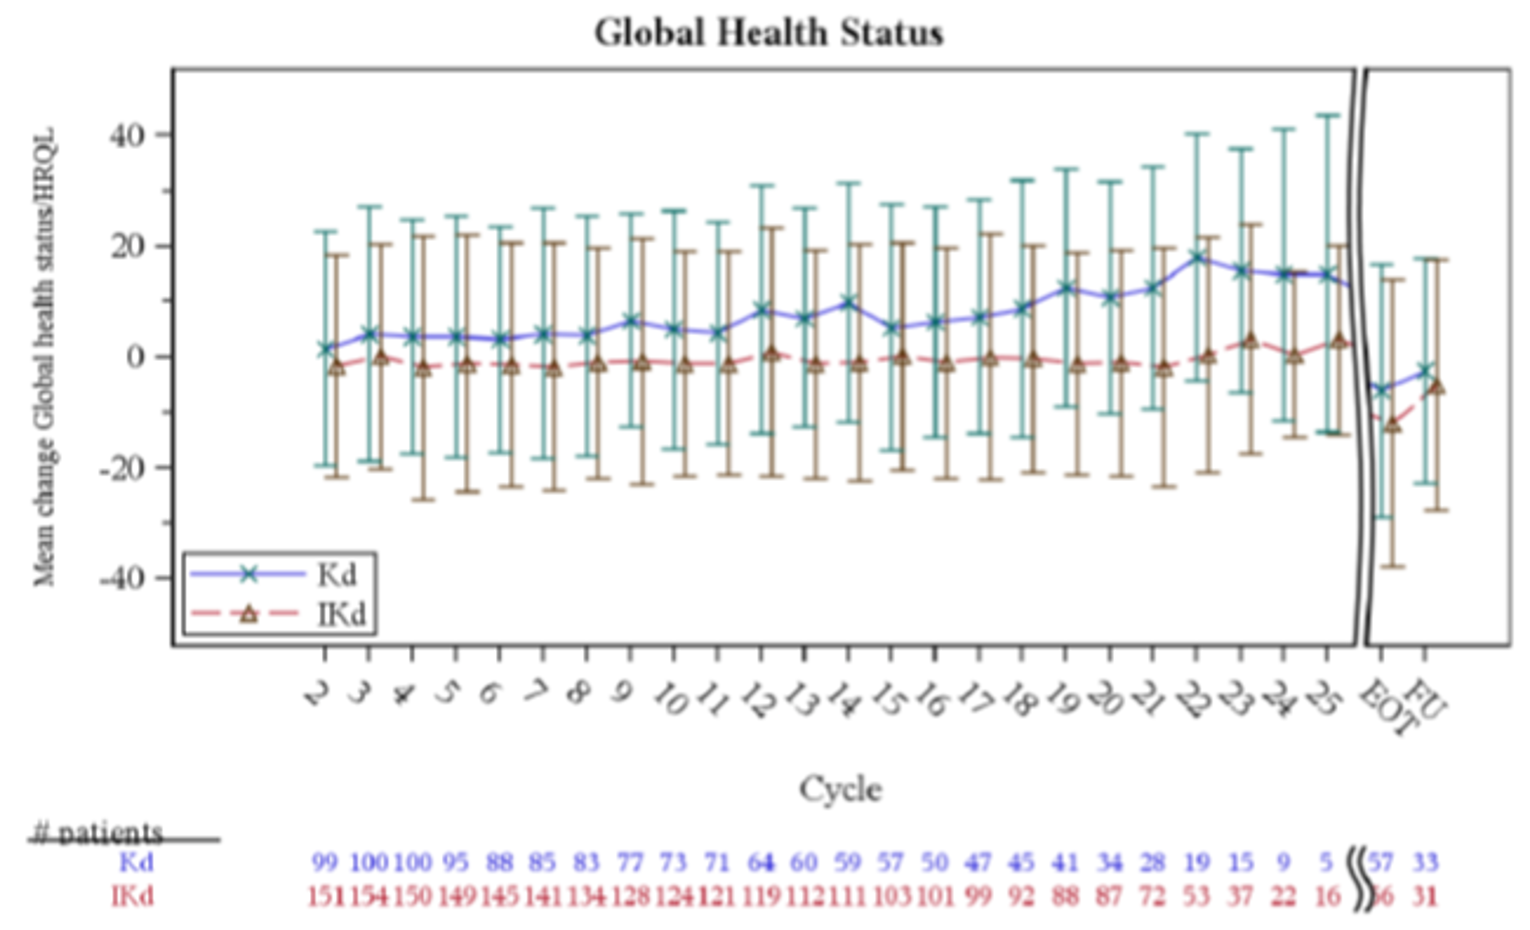 In this graph highlighting the mean change from baseline and 95% CI for the EORTC QLQ-C30 Global Health Status/QoL by treatment group, the number of patients treated with Kd at cycles 2 to 25, at EOT, and at FU was 99, 100, 100, 95, 88, 85, 83, 77, 73, 71, 64, 60, 59, 57, 50, 47, 45, 41, 34, 28, 19, 15, 9, 5, 57, and 33, respectively. The number of patients treated with IsaKd at cycles 2 to 25, at EOT, and at FU was 151, 154, 150, 149, 145, 141, 134, 128, 124, 121, 119, 112, 111, 103, 101, 99, 92, 88, 87, 72, 53, 37, 22, 16, 56, and 31 respectively.